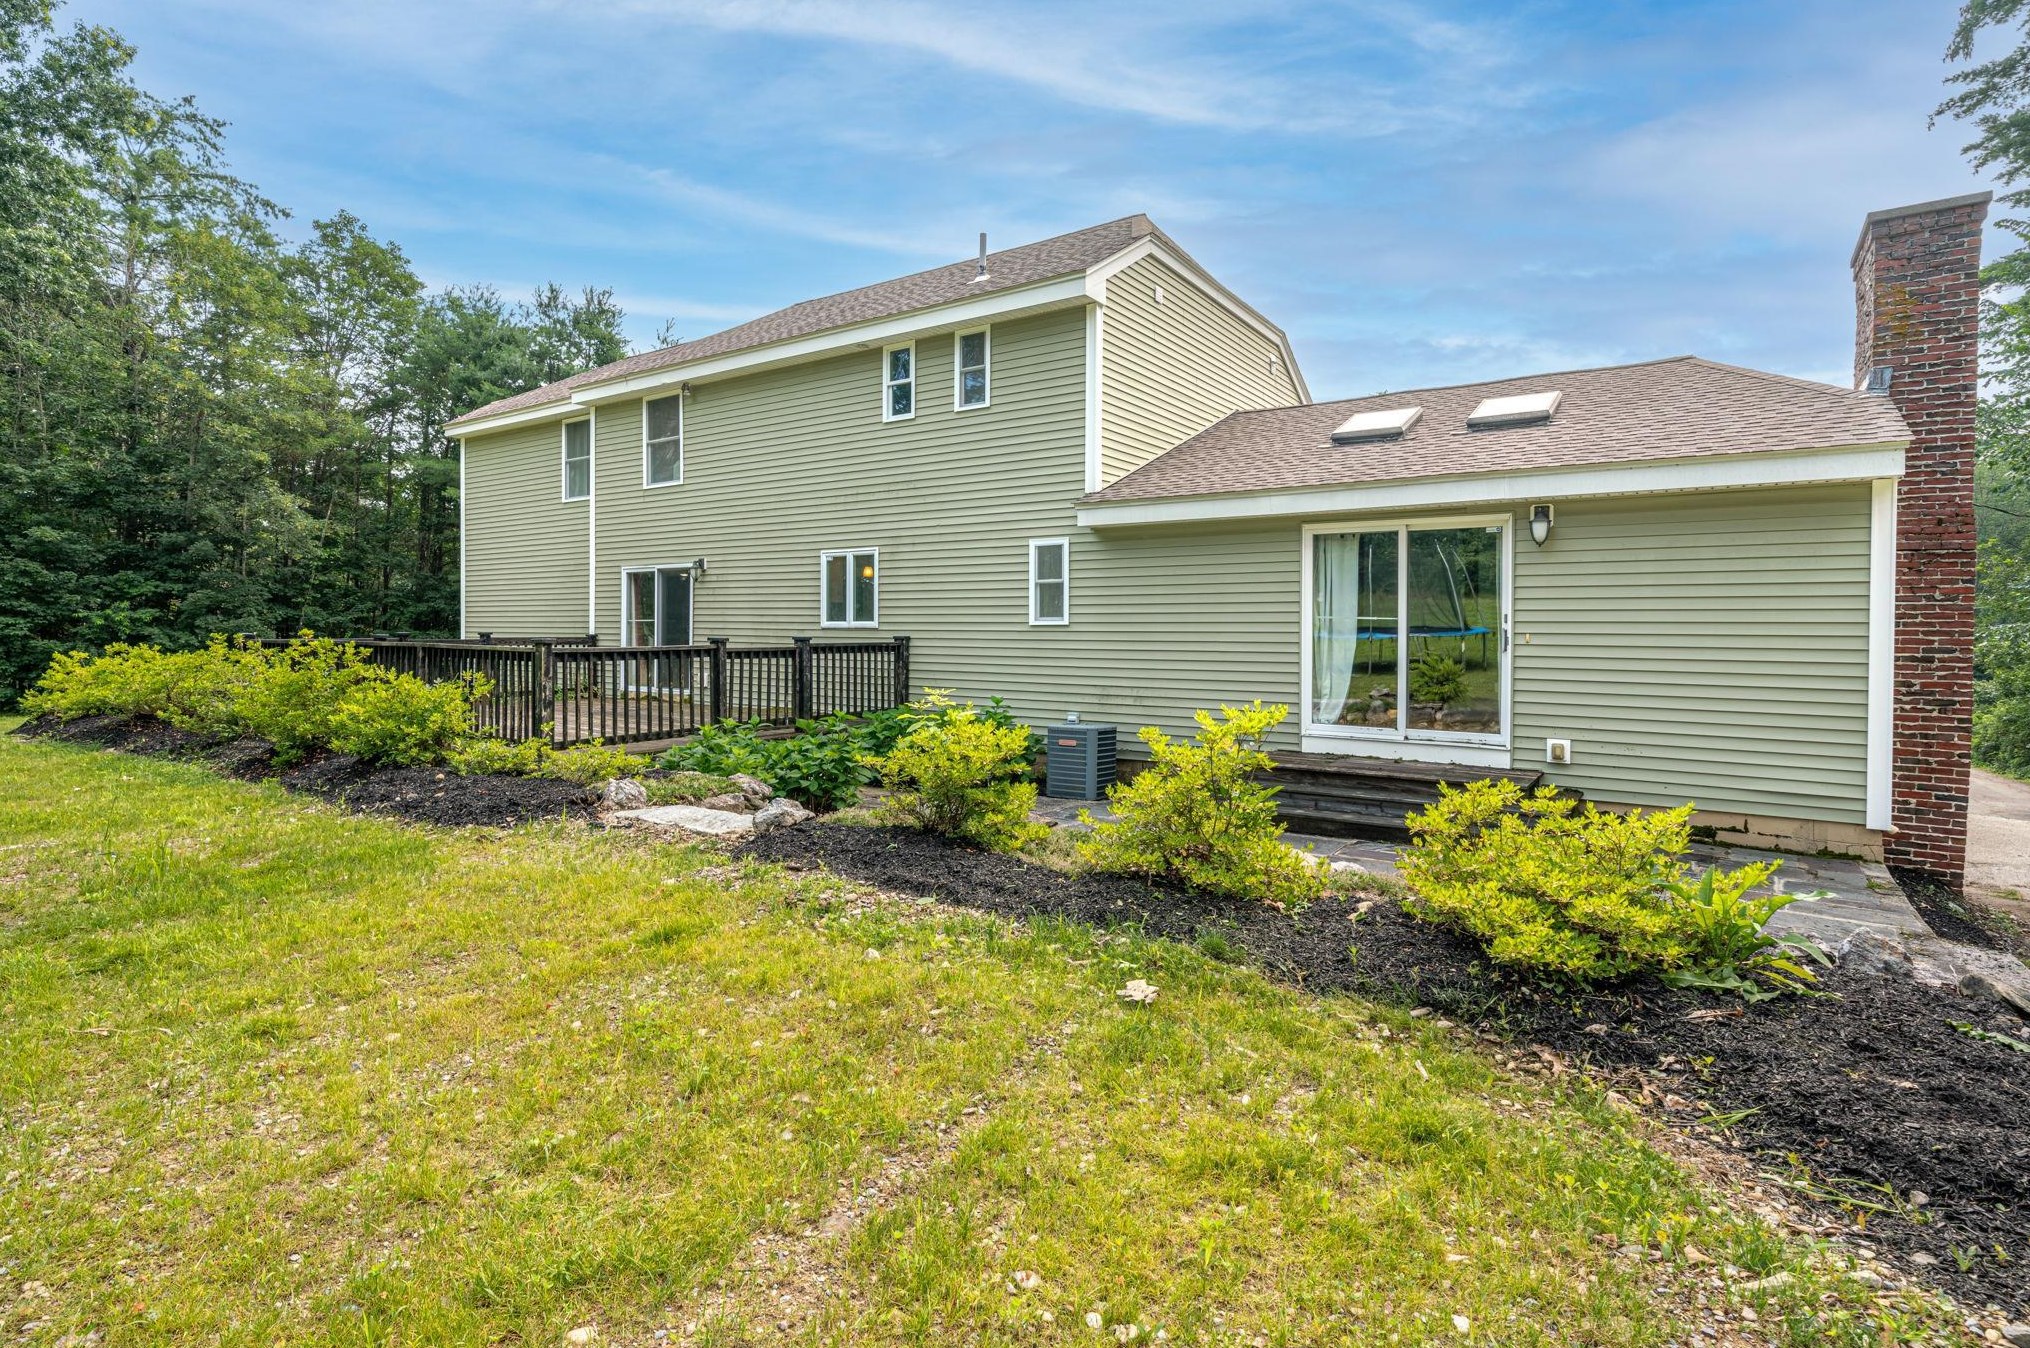 6 Lowell Rd, Windham, NH 03087-1814